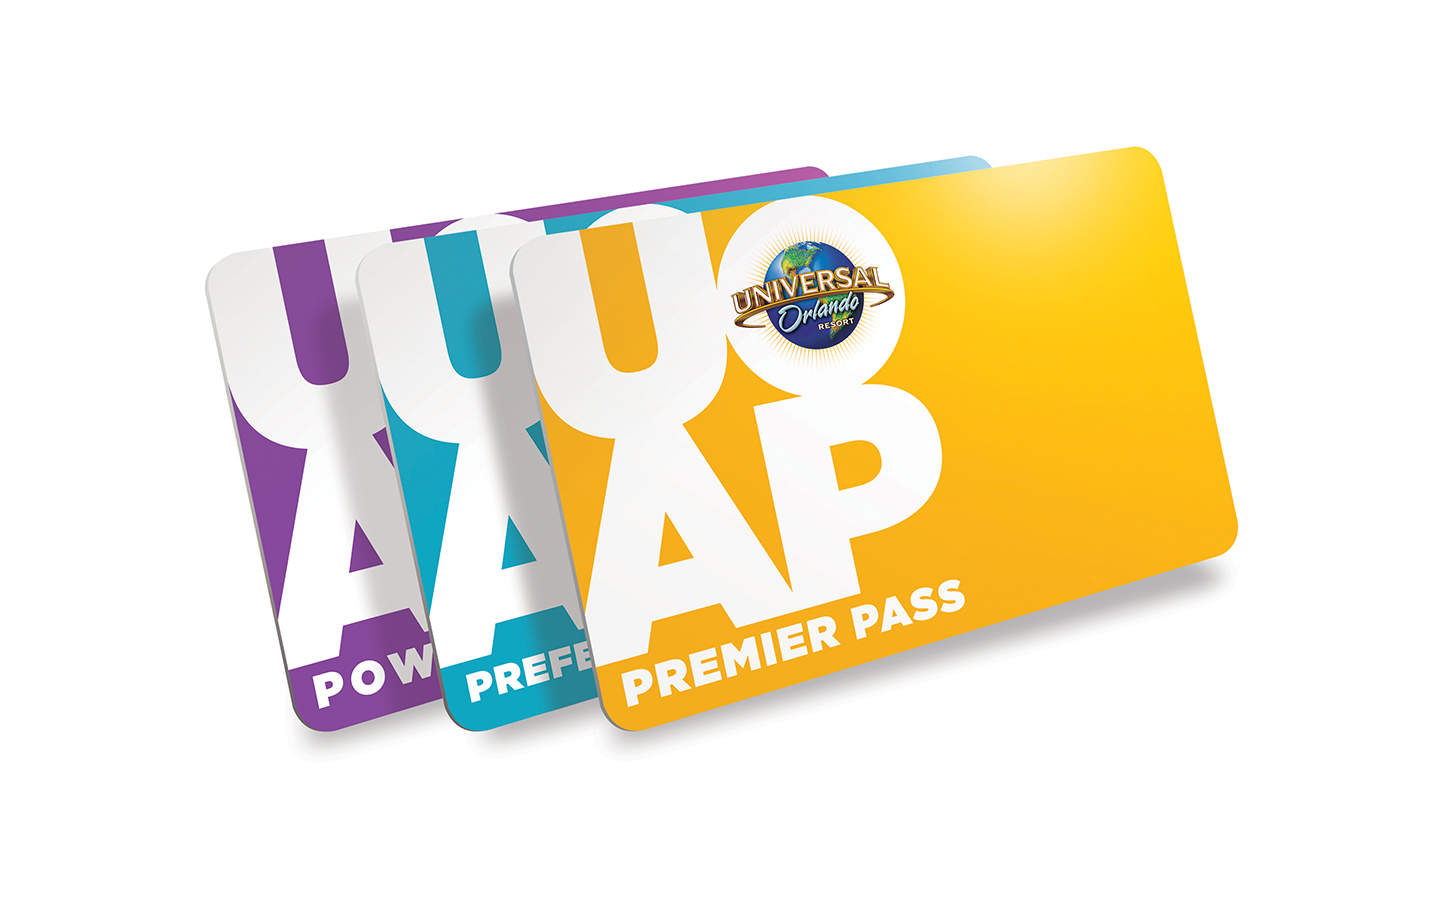 Plastic Annual Passes confirmed by Universal Orlando